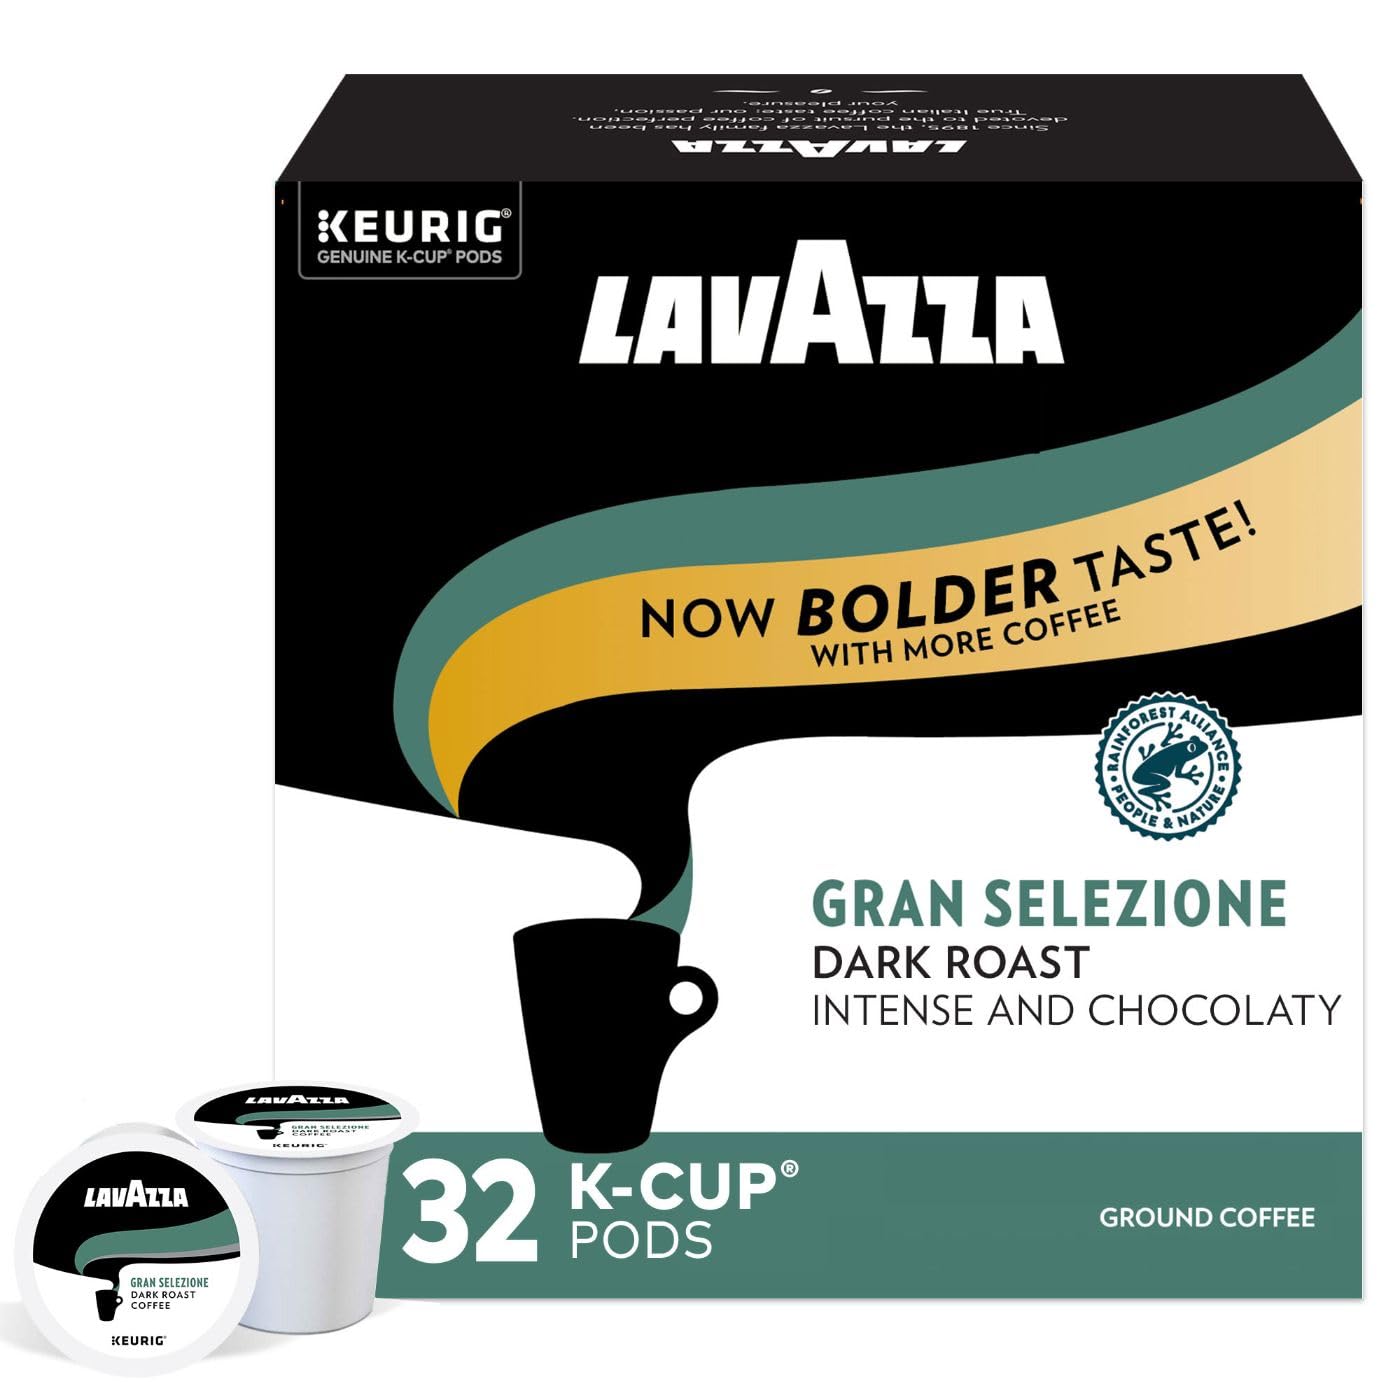 Lavazza Gran Selezione Single-Serve Coffee K-Cup® Pods for Keurig® Brewer, Dark Roast, 32Count Box, (Pack Of 4) 100% Arabica, Rainforest Alliance Certified 100% sustainably grown, Value Pack